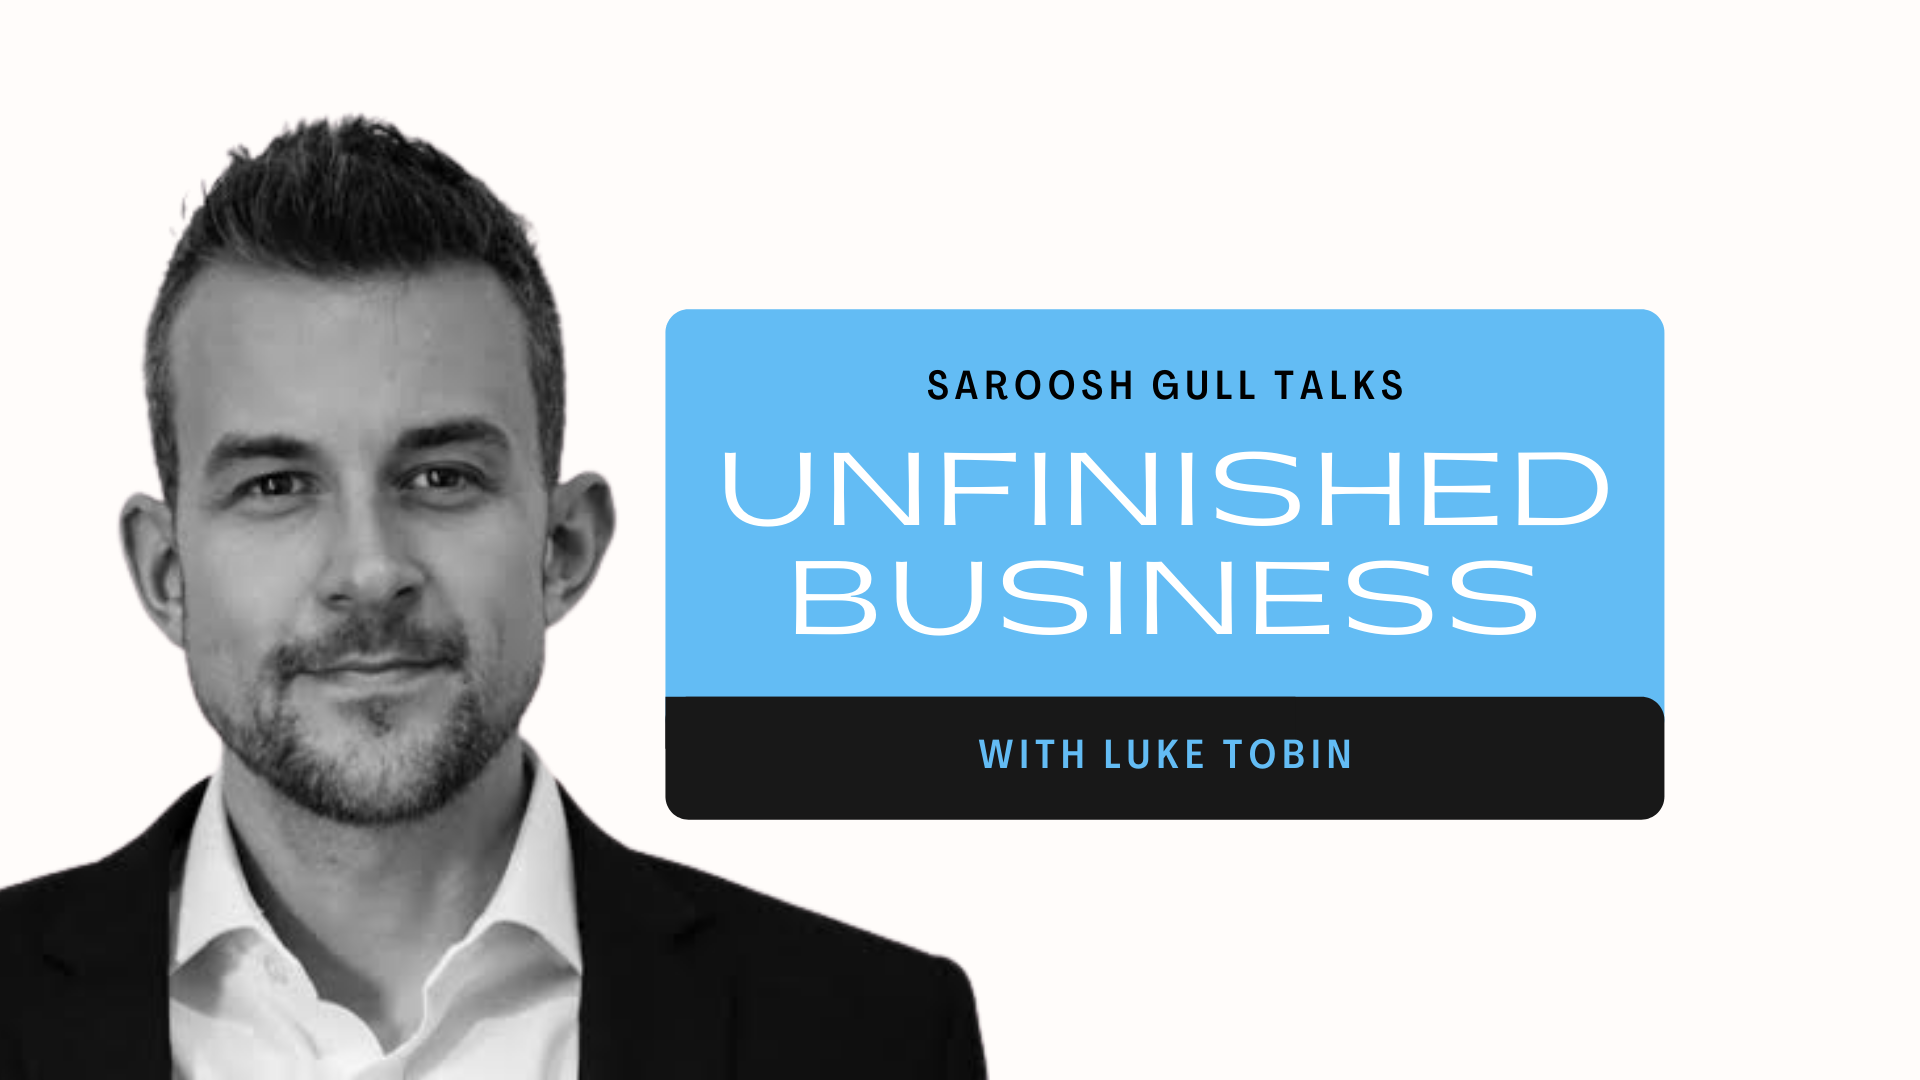 Unfinished Business with Luke Tobin